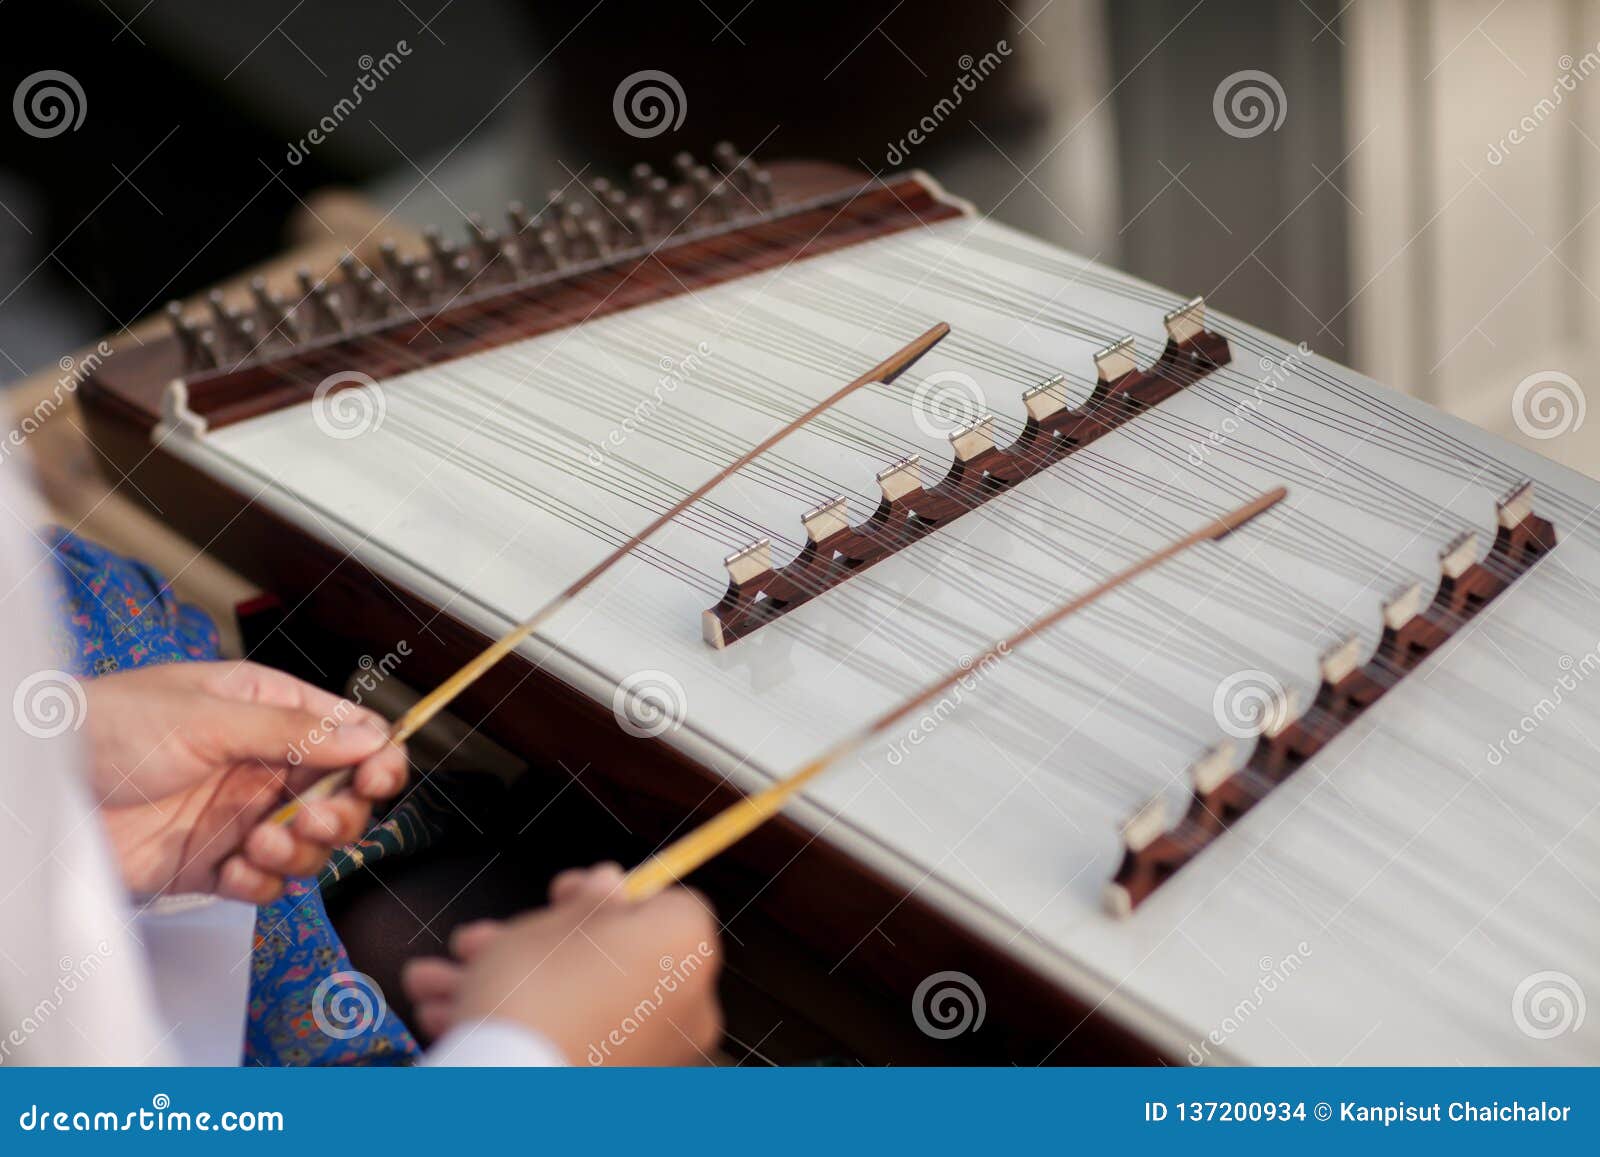 tenga en cuenta Gama de conciencia A Dulcimer Which Thai Traditional Music Instrument. Man Playing Hammered  Dulcimer with Mallets Stock Photo - Image of background, folk: 137200934